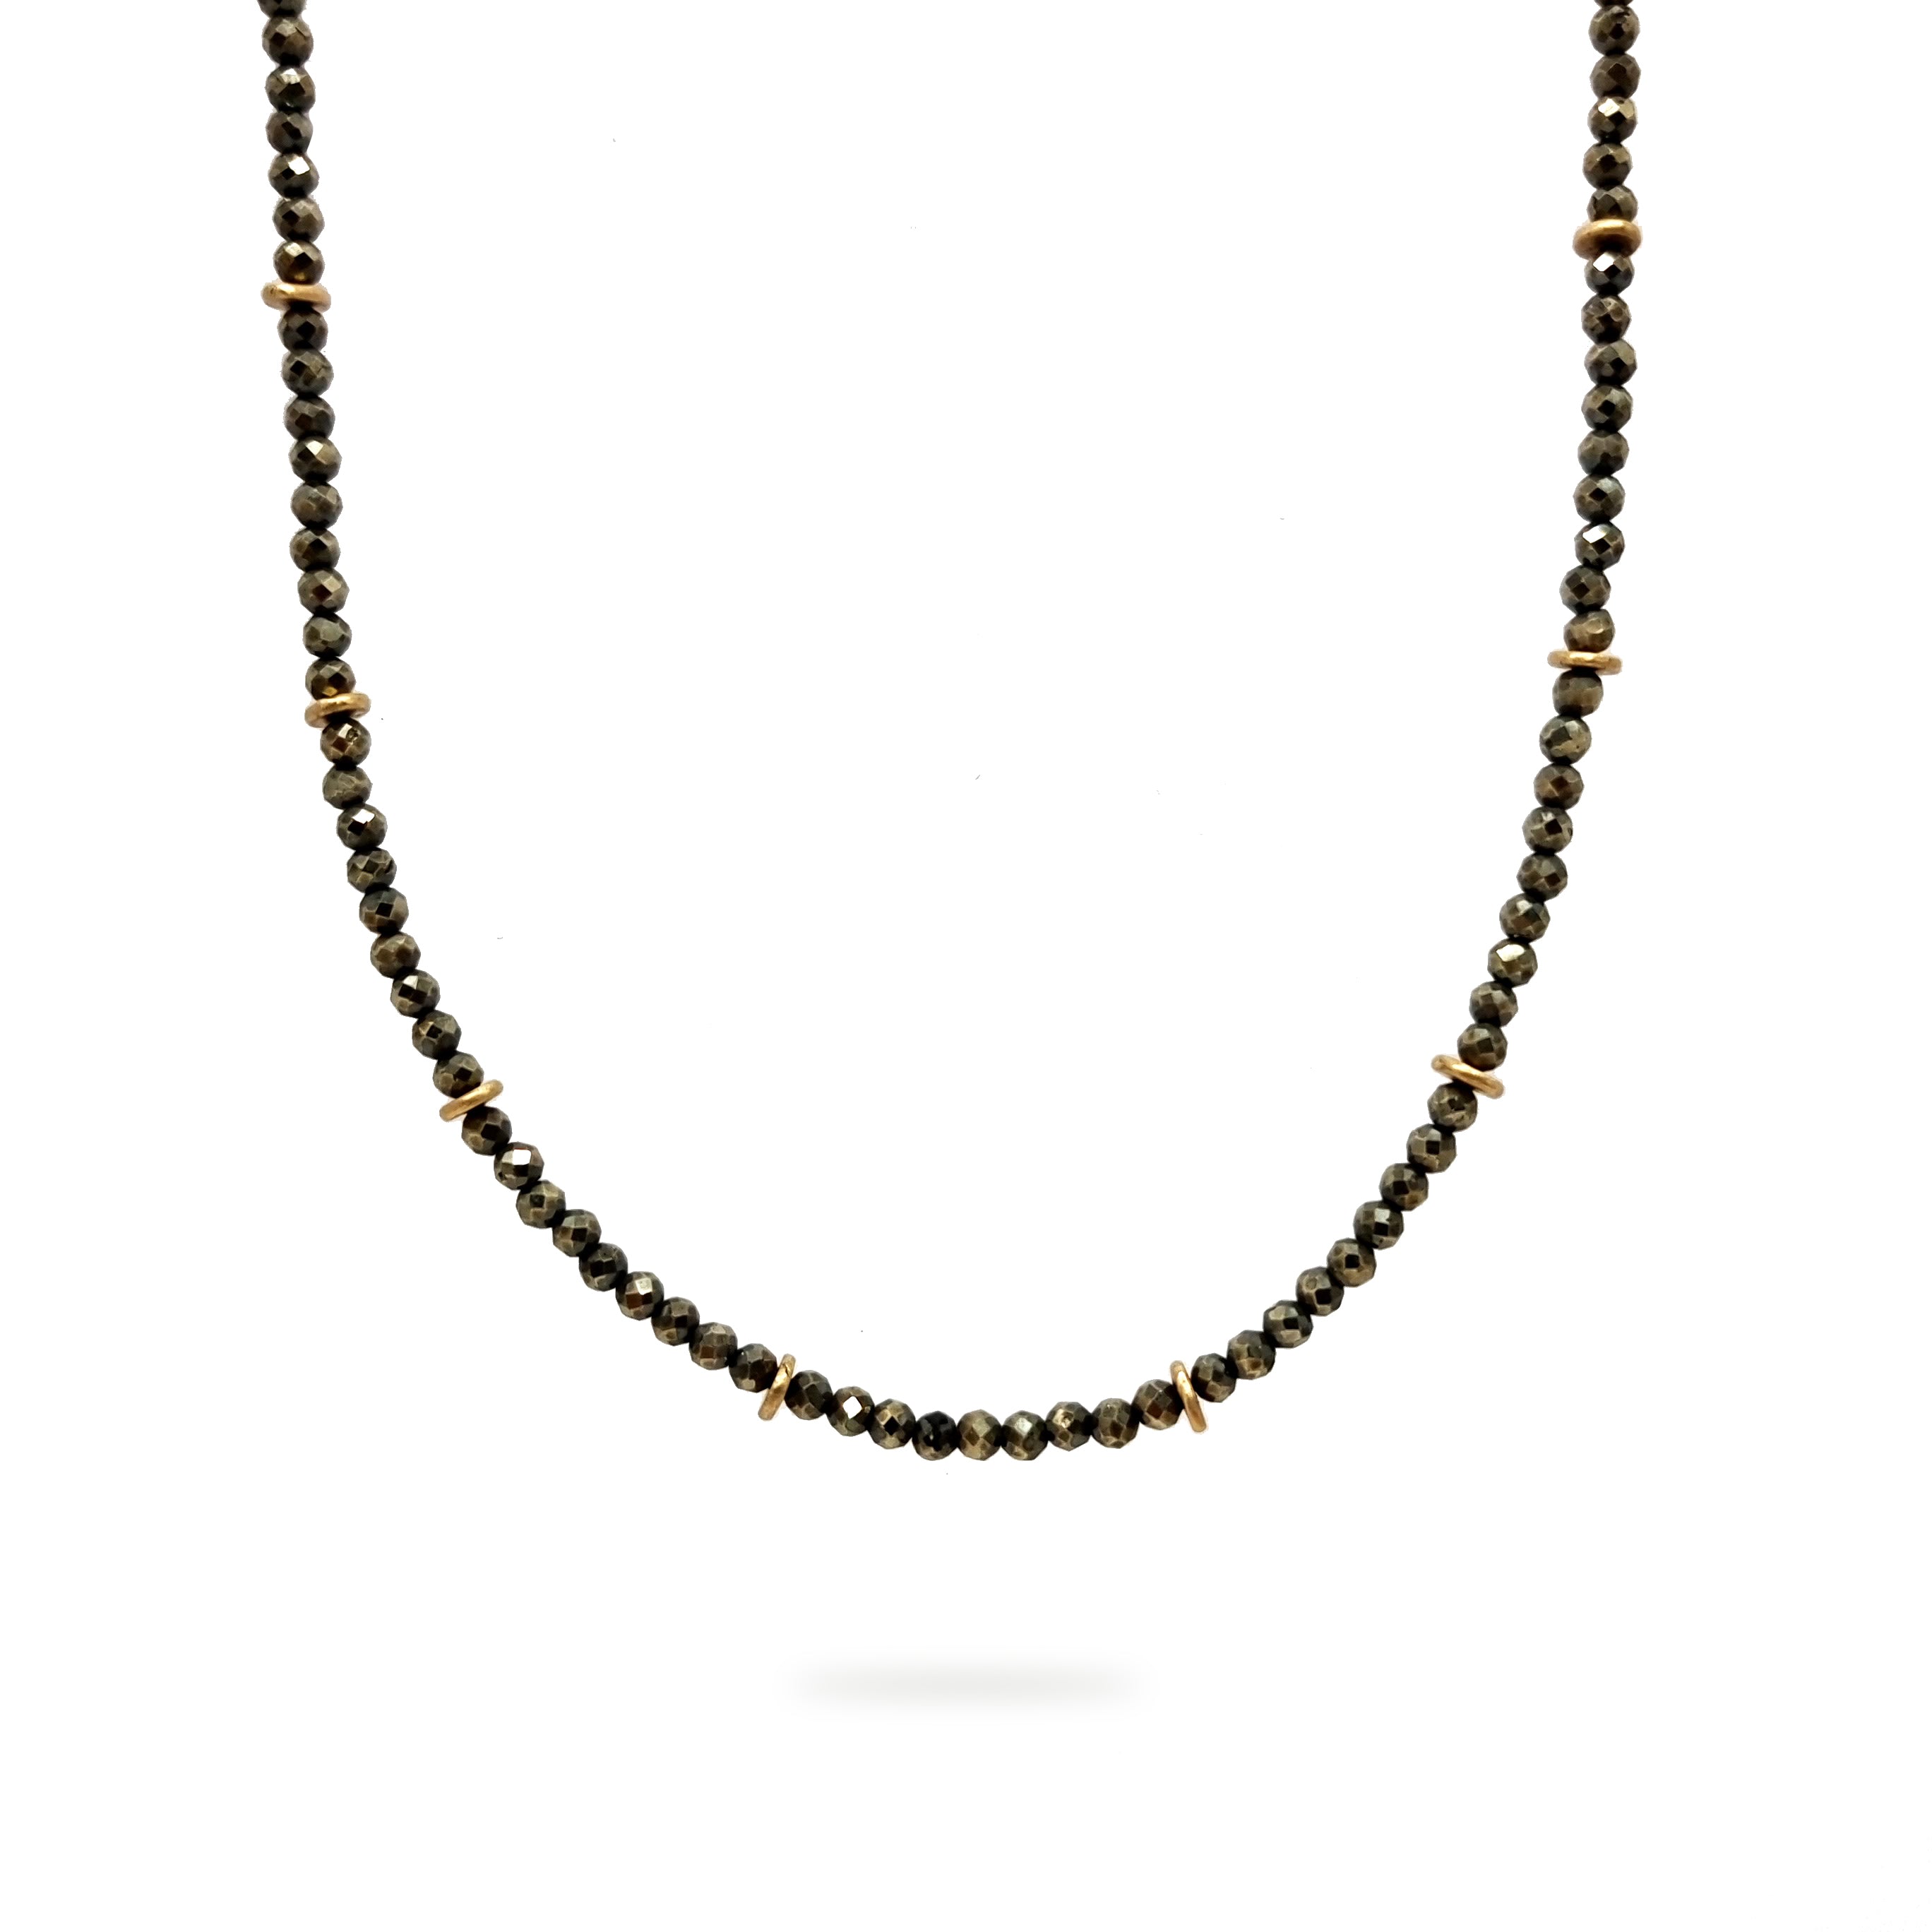 A beaded Pyrite and 9ct Gold choker necklace hangs on a white background. It has a blackened sterling silver chain. Handmade by Emily Eliza Arlotte Handcrafted Fine Jewellery in Hobart, Tasmania Australia.